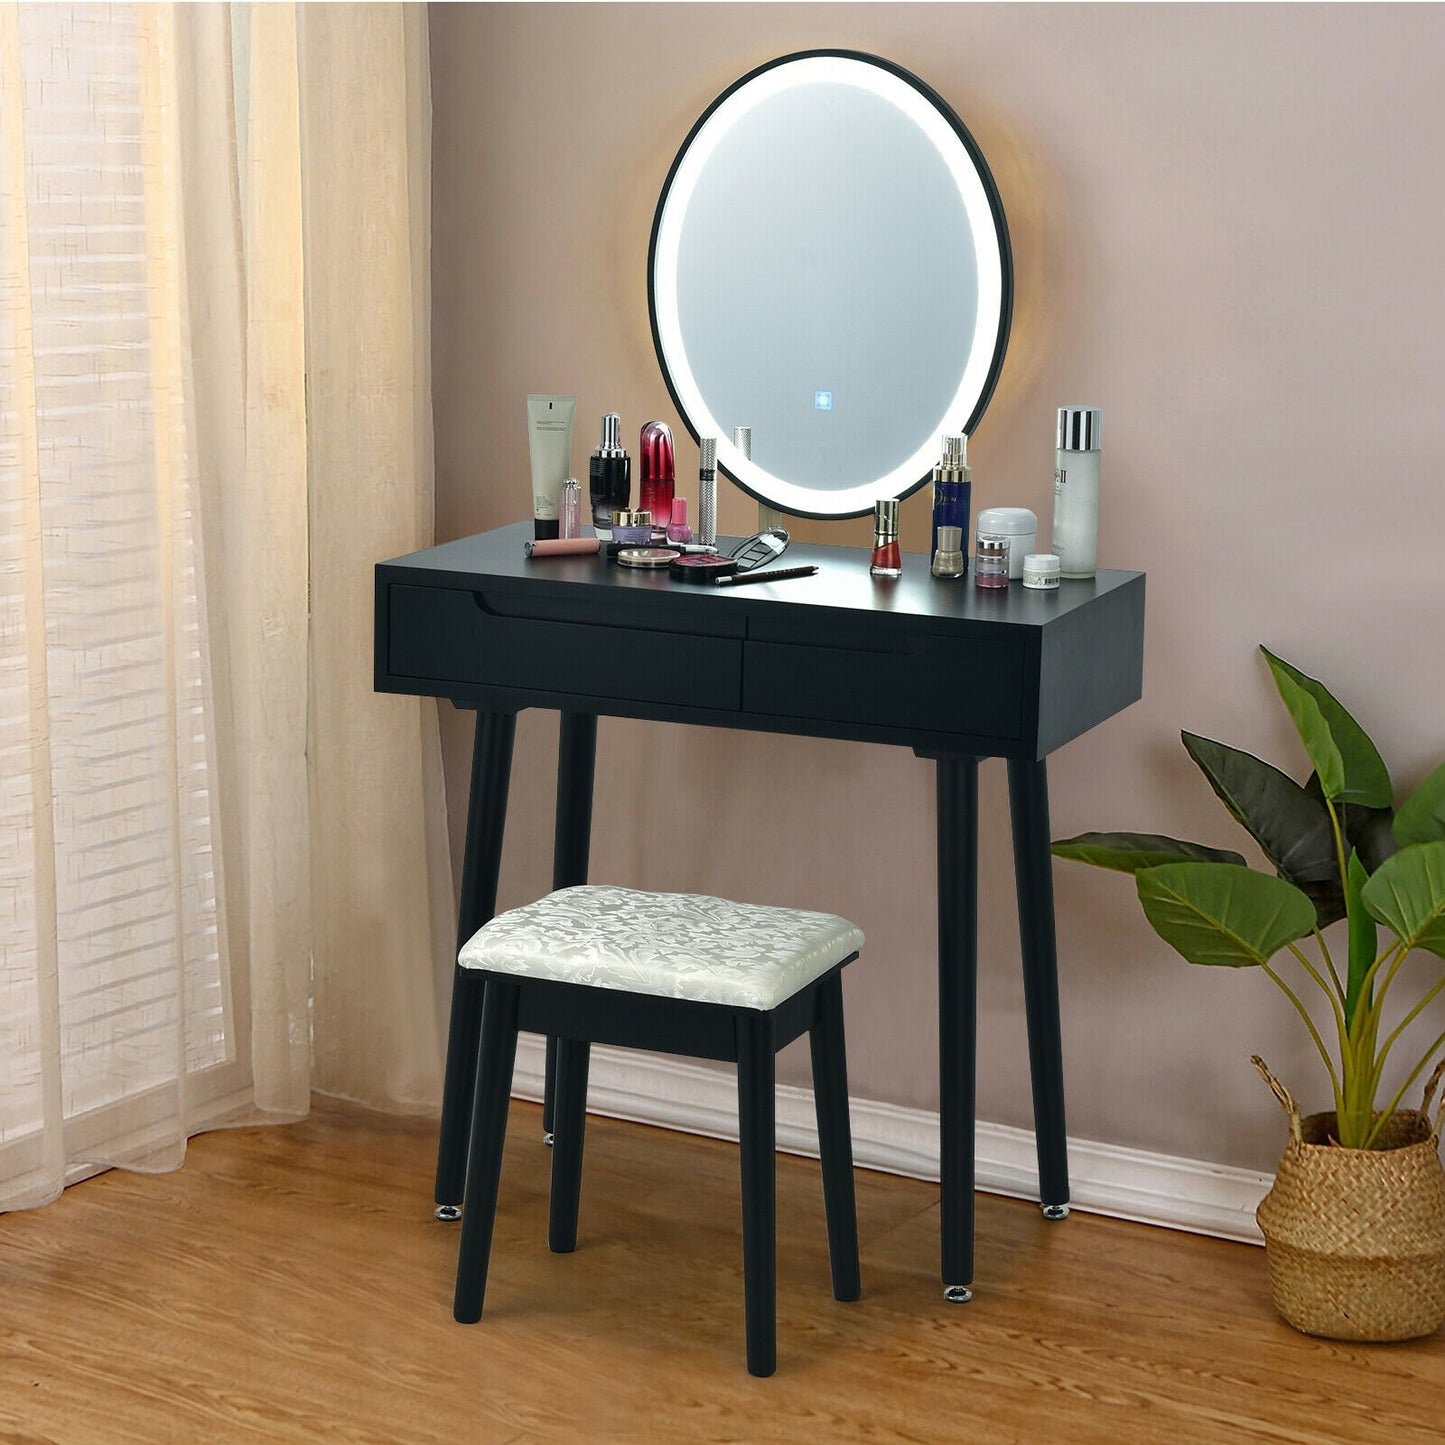 Touch Screen Vanity Makeup Table Stool Set, Black